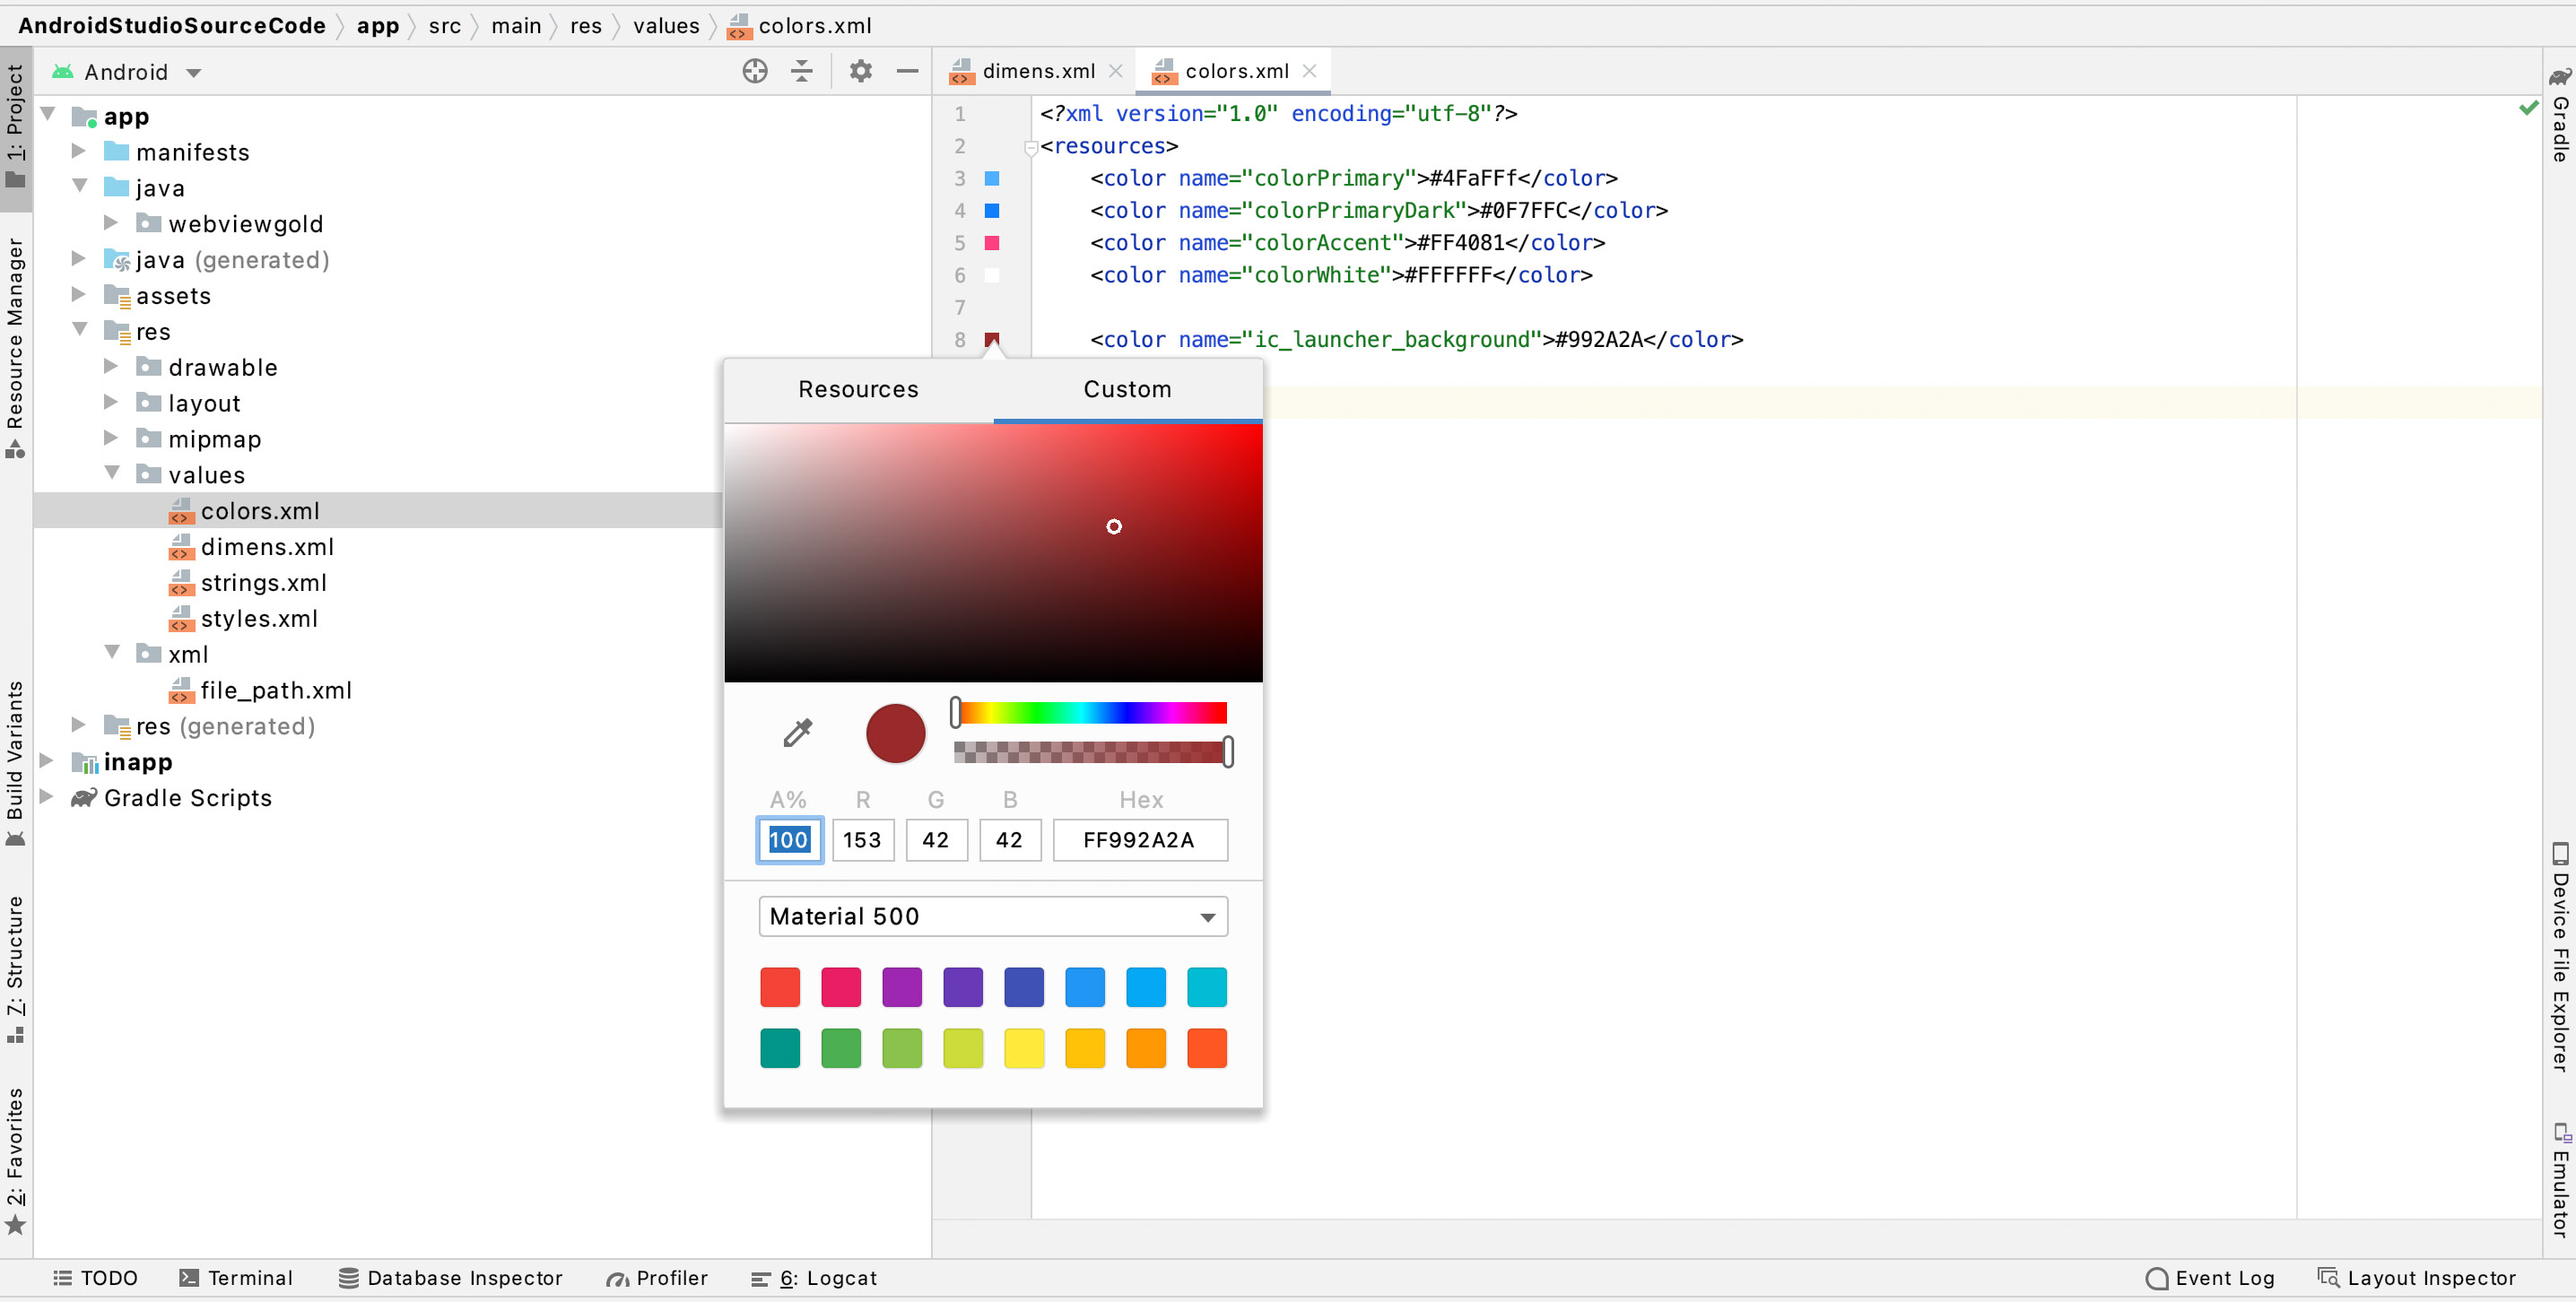 Modify the assets in colors.xml to re-color objects and screens